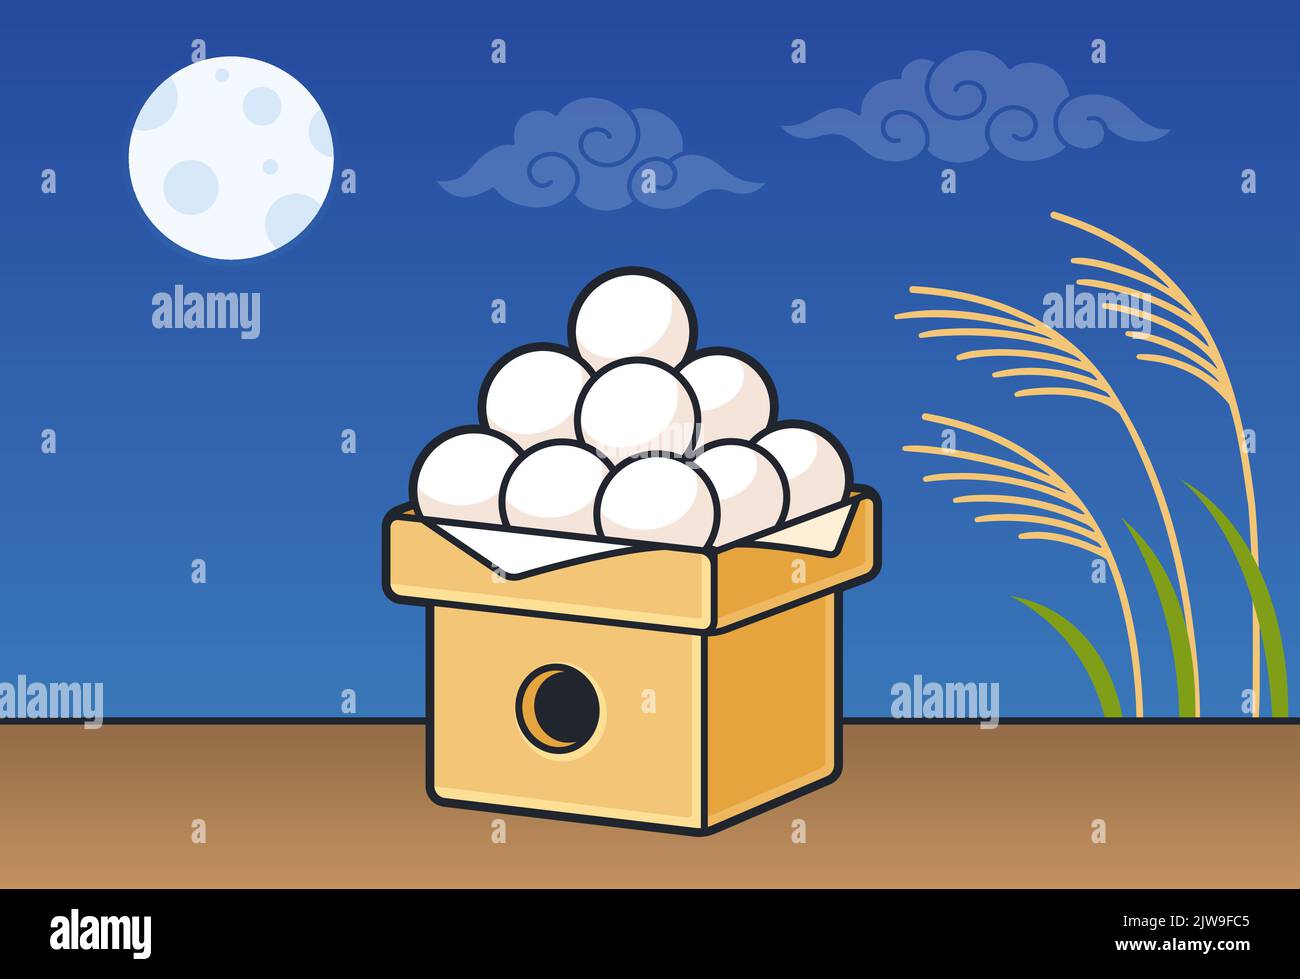 Full moon viewing on Tsukimi, Japanese Mid-Autumn Festival. Night sky with dango (rice cakes) and pampas grass. Cartoon vector clip art illustration. Stock Vector